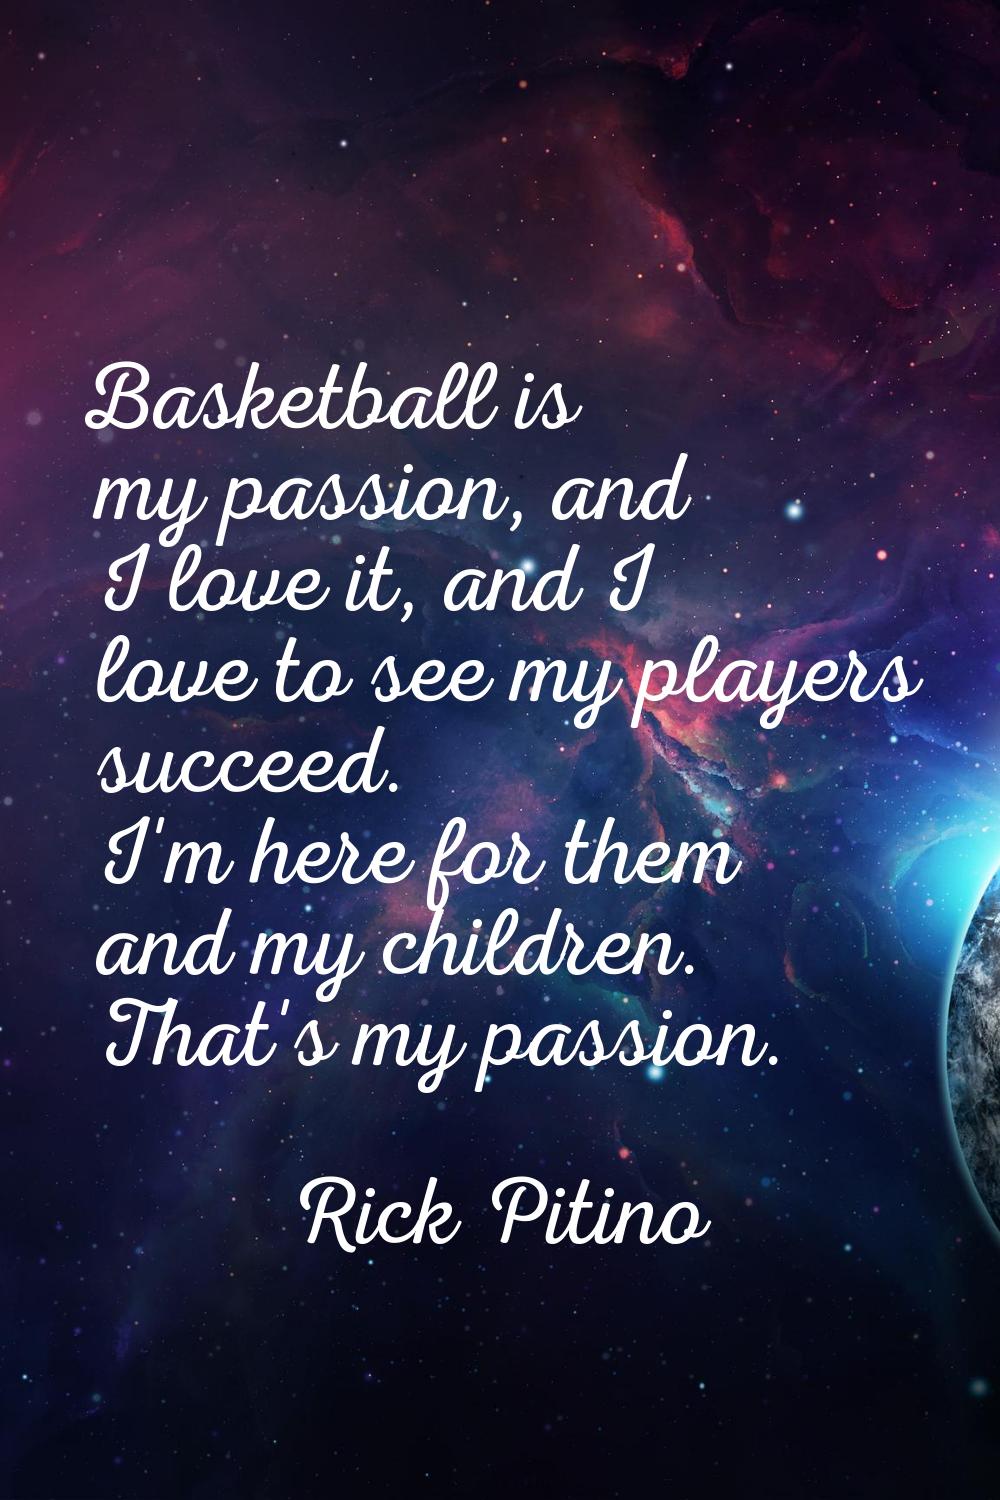 Basketball is my passion, and I love it, and I love to see my players succeed. I'm here for them an